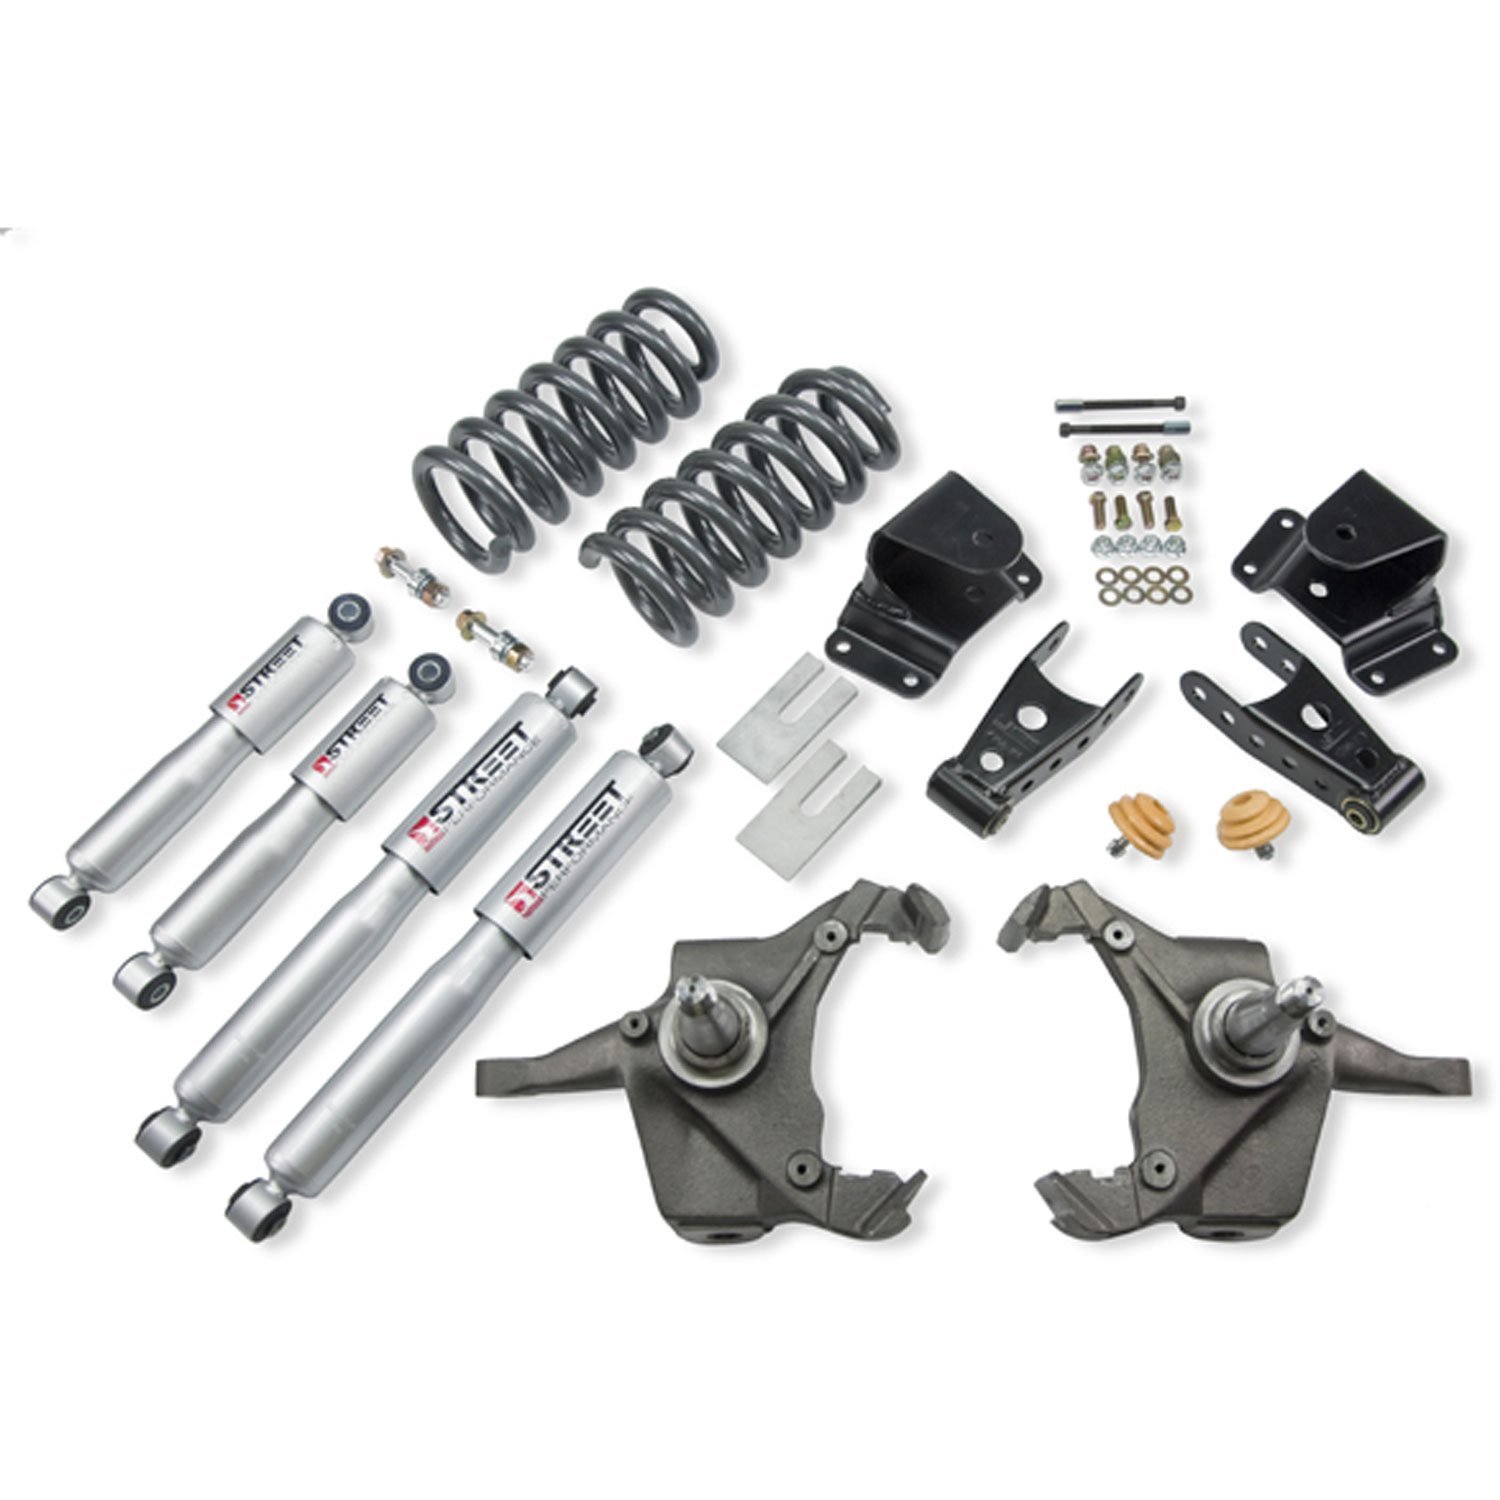 Complete Lowering Kit for 1975-1991 Chevy/GMC 1 Ton